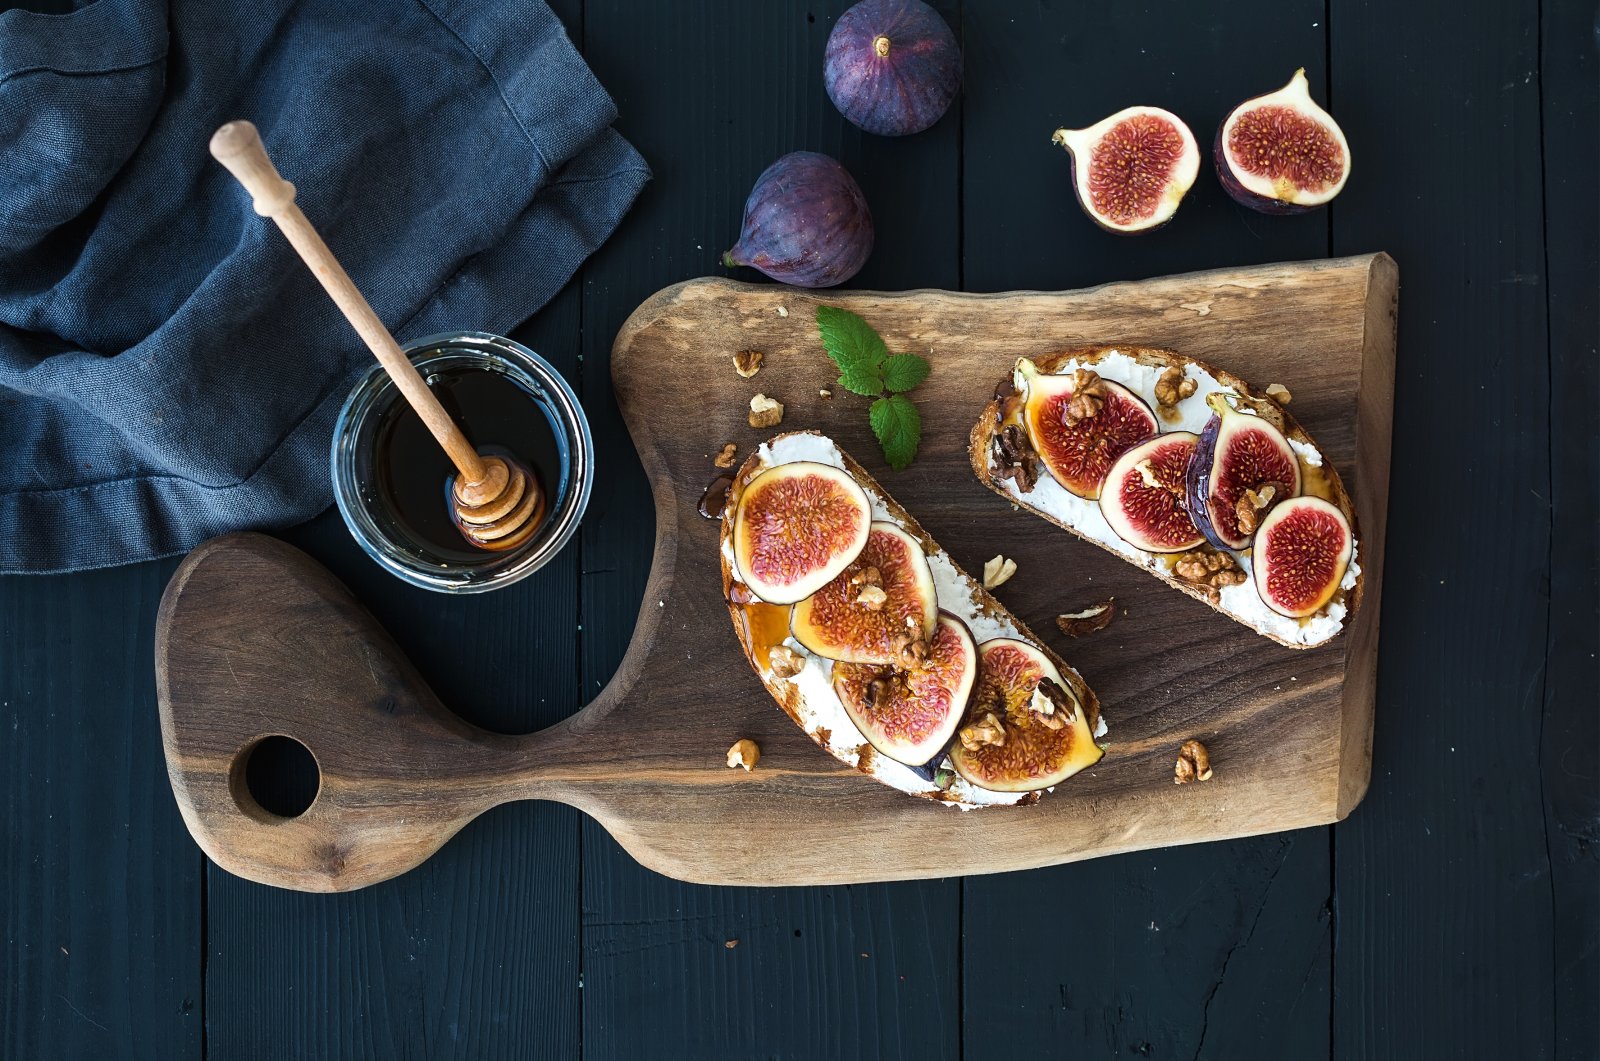 Ricotta, fresh figs, walnuts and honey go well on some homemade sourdough bread. (iStock Photo)